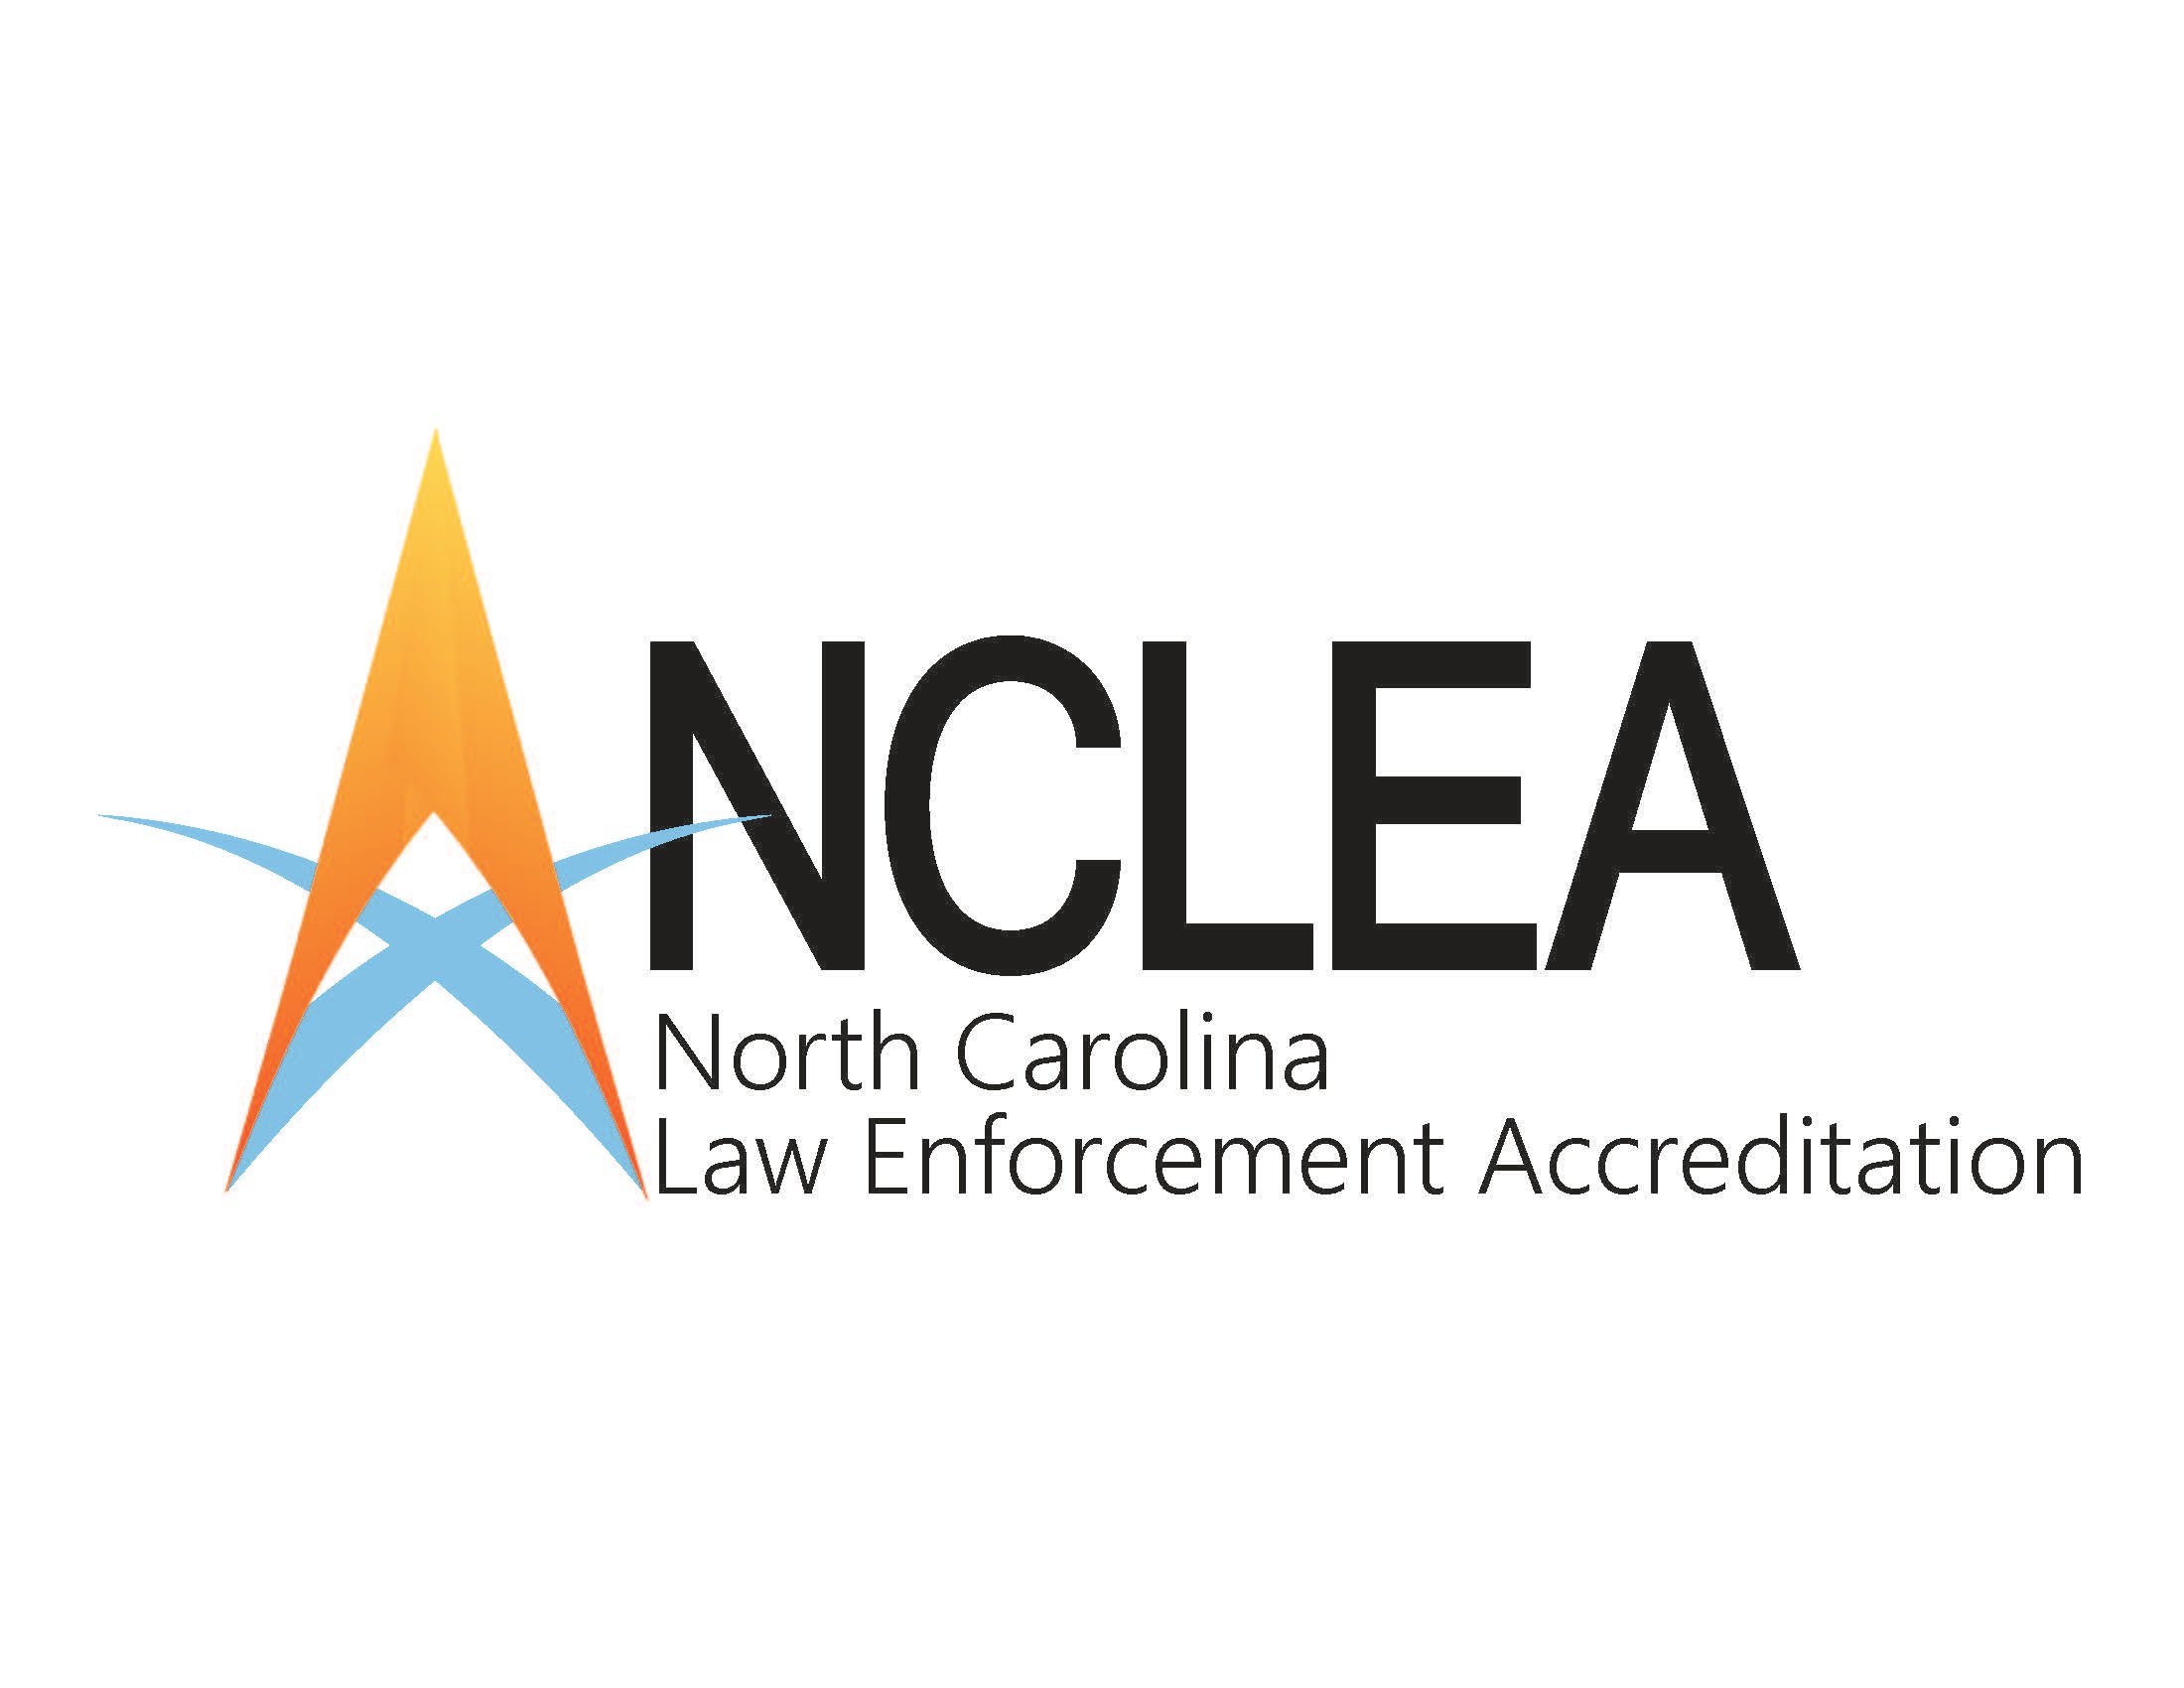 The North Carolina Department Of Justice Law Enforcement Training & Standards Division Accreditation logo